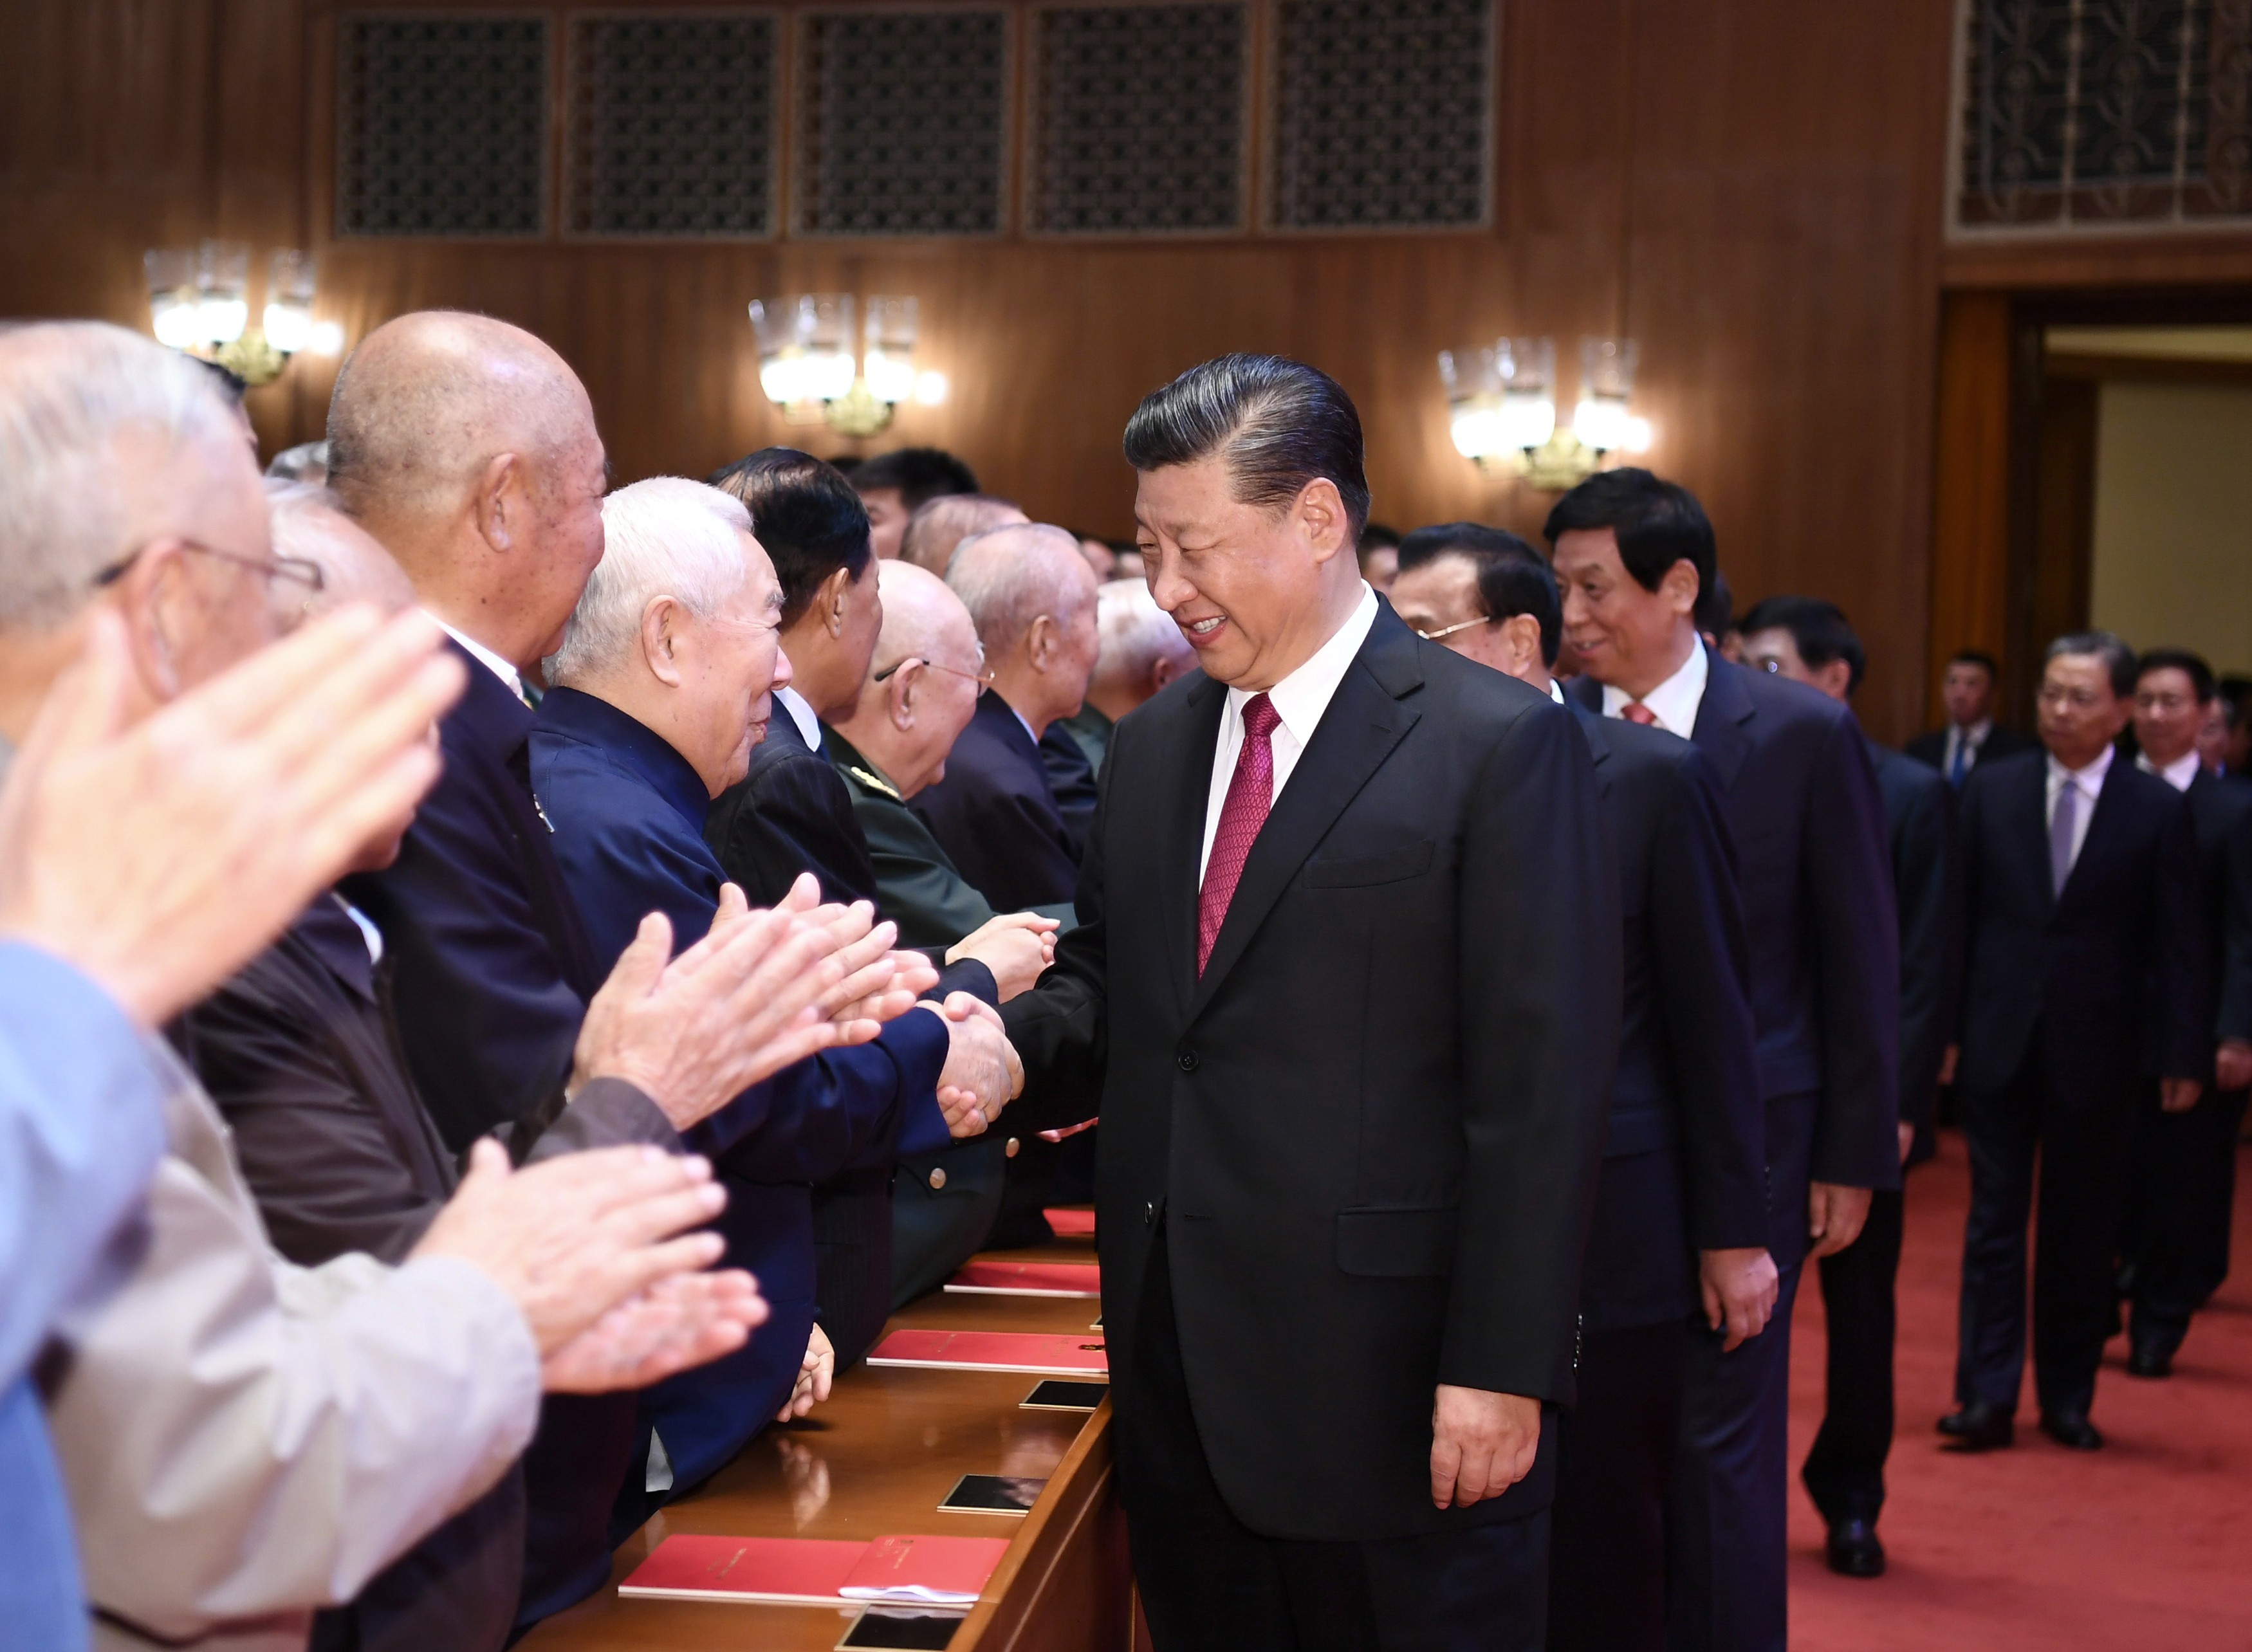 Chinese President Xi Jinping joins more than 4,000 people to watch a performance at the Great Hall of the People in Beijing on September 29 to celebrate the 70th founding anniversary of the People's Republic of China. Photo: Xinhua